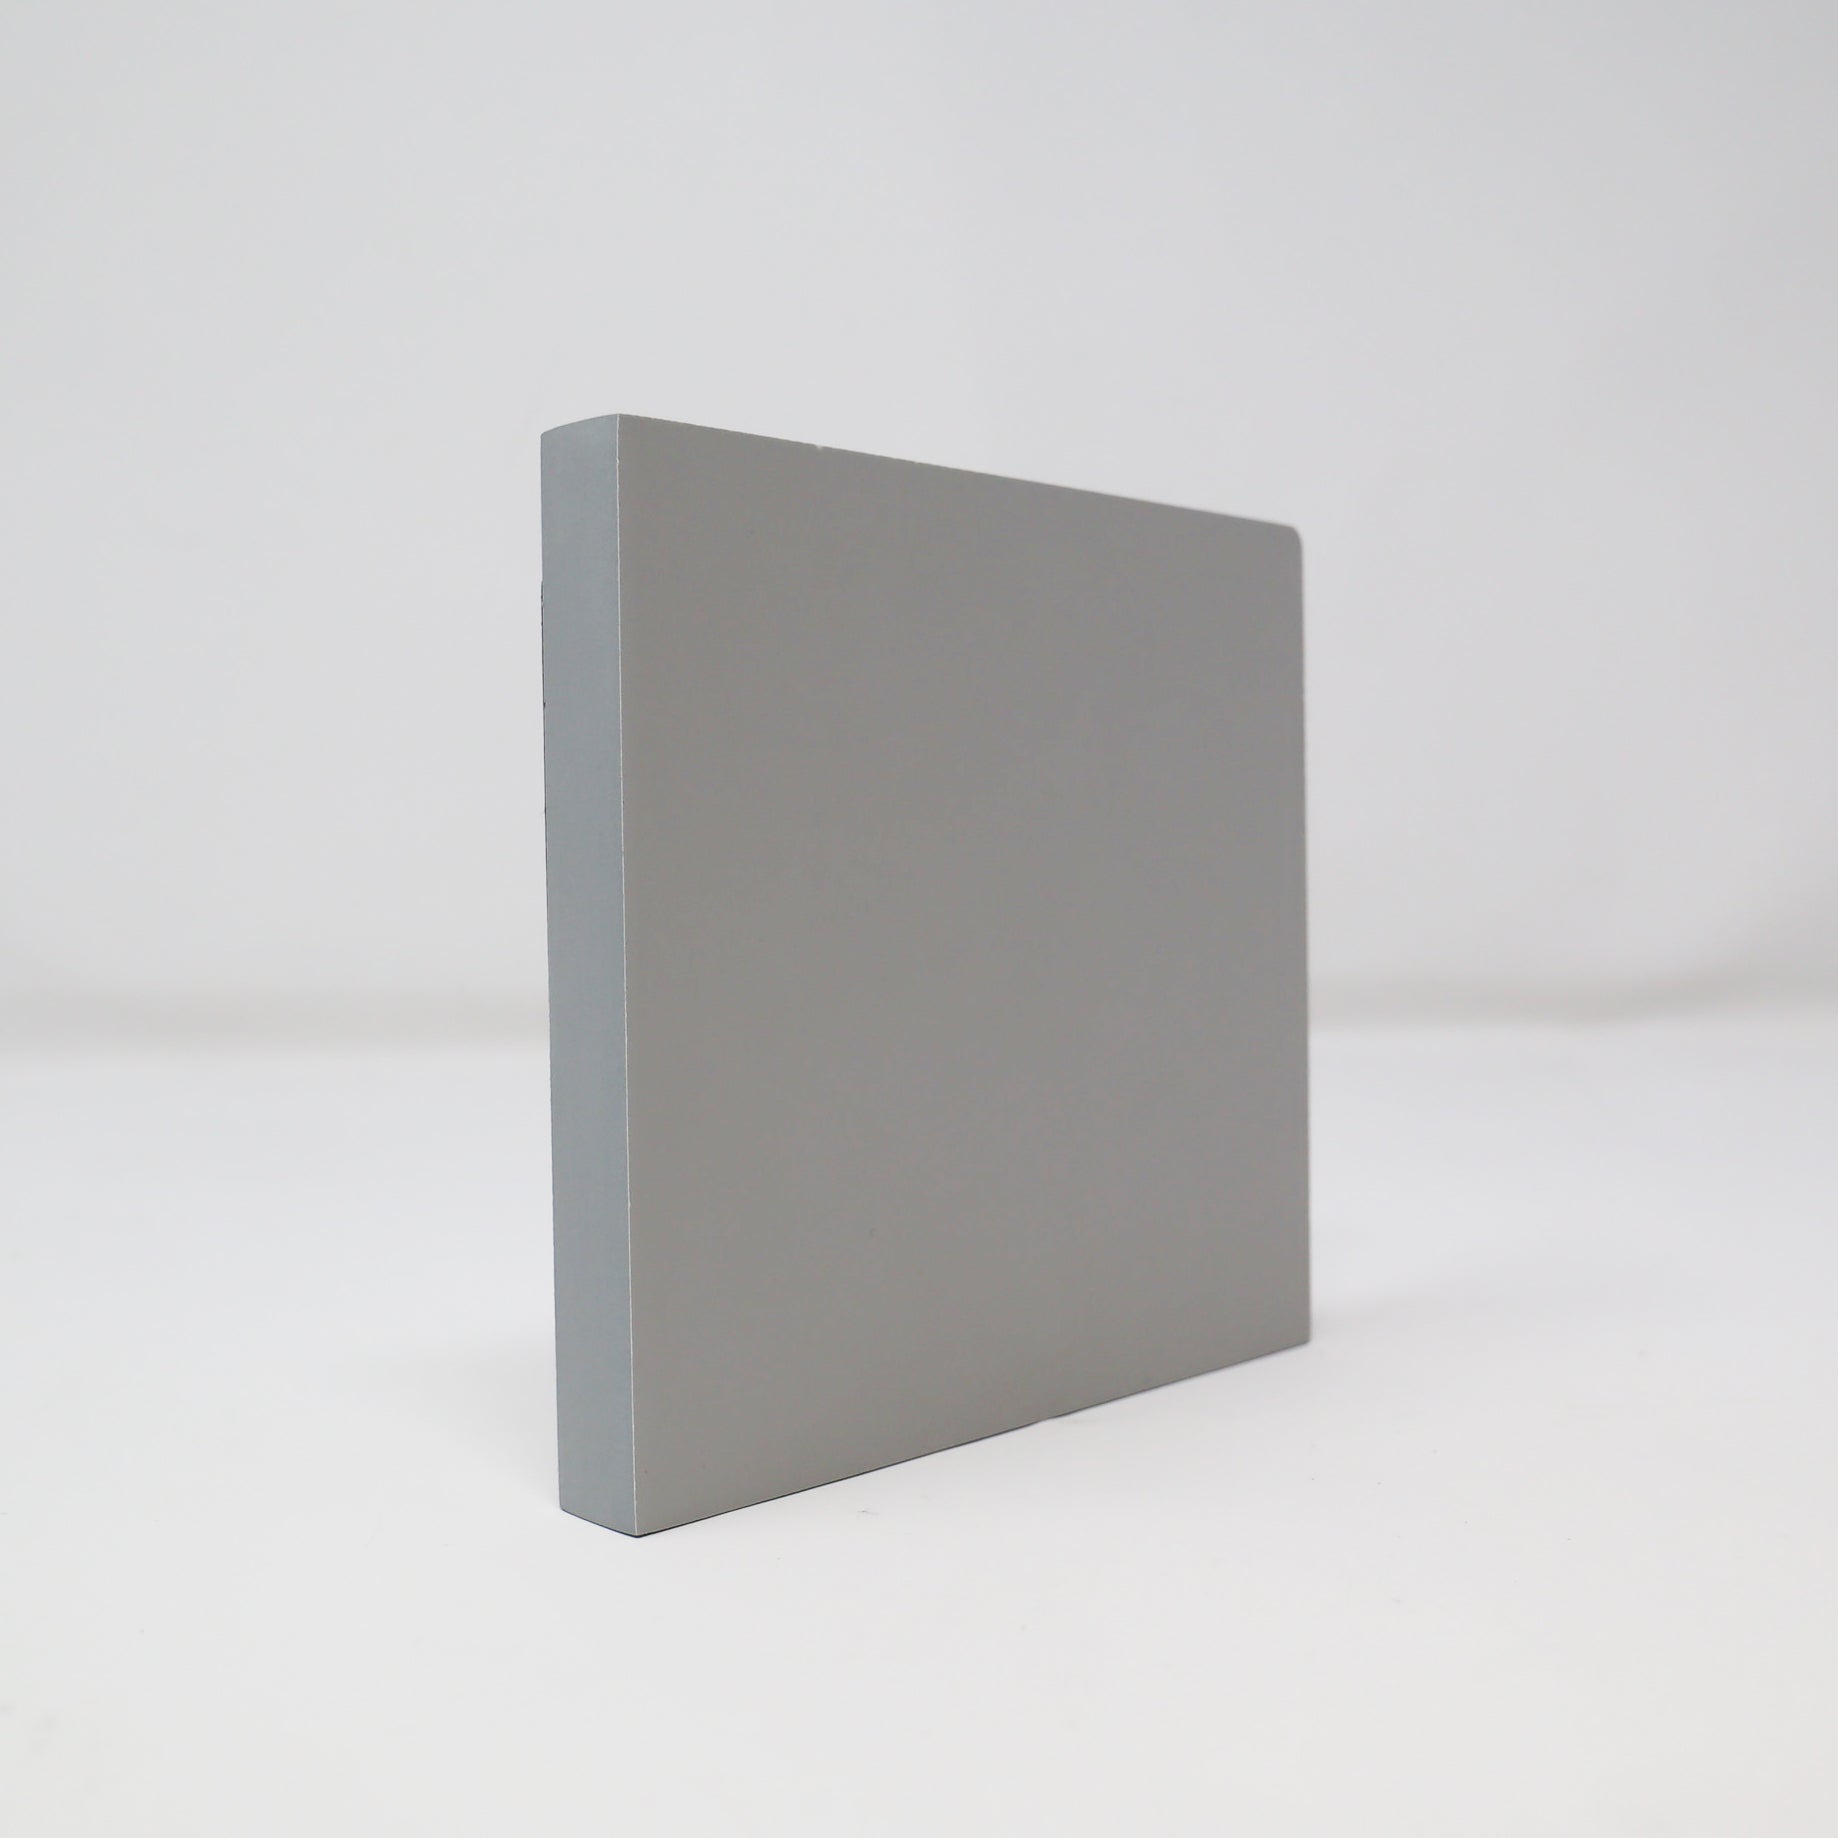 dECOMatte Thin Fronts & Surfaces Sample Kits